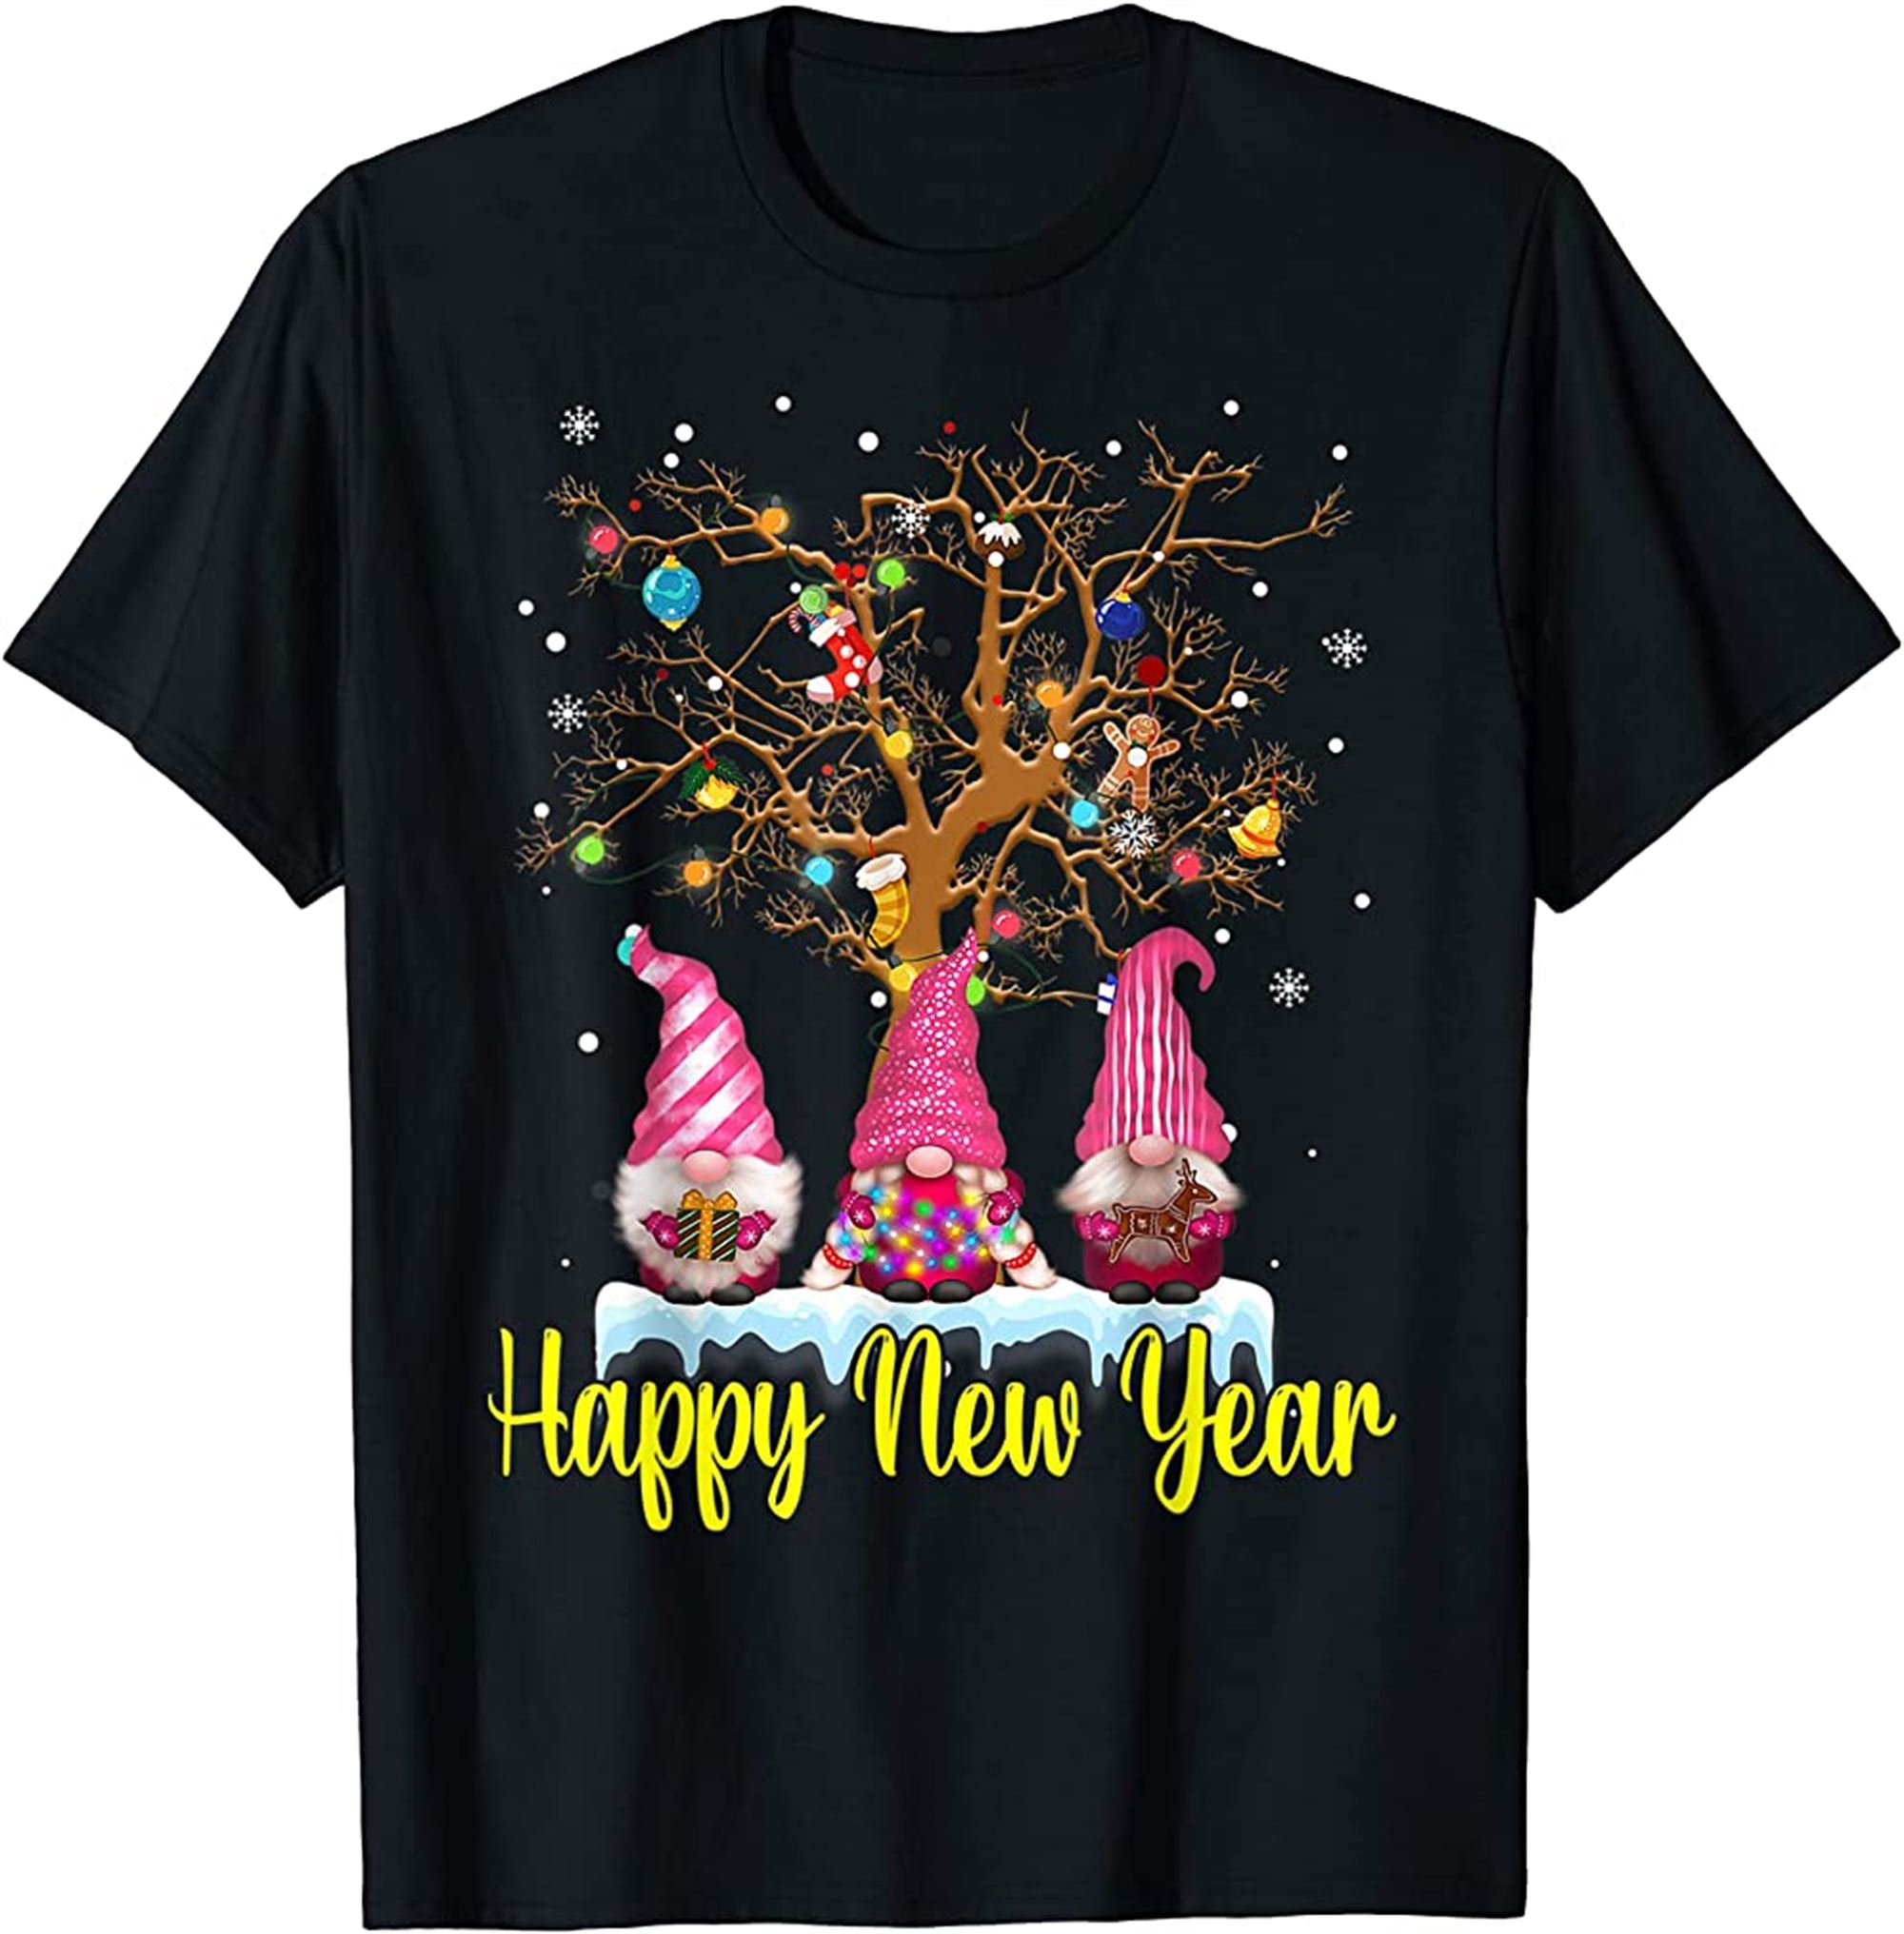 Happy New Year 2022 Pink Gnomes Xmas Family Fireworks T-shirt Plus Size Up To 5xl